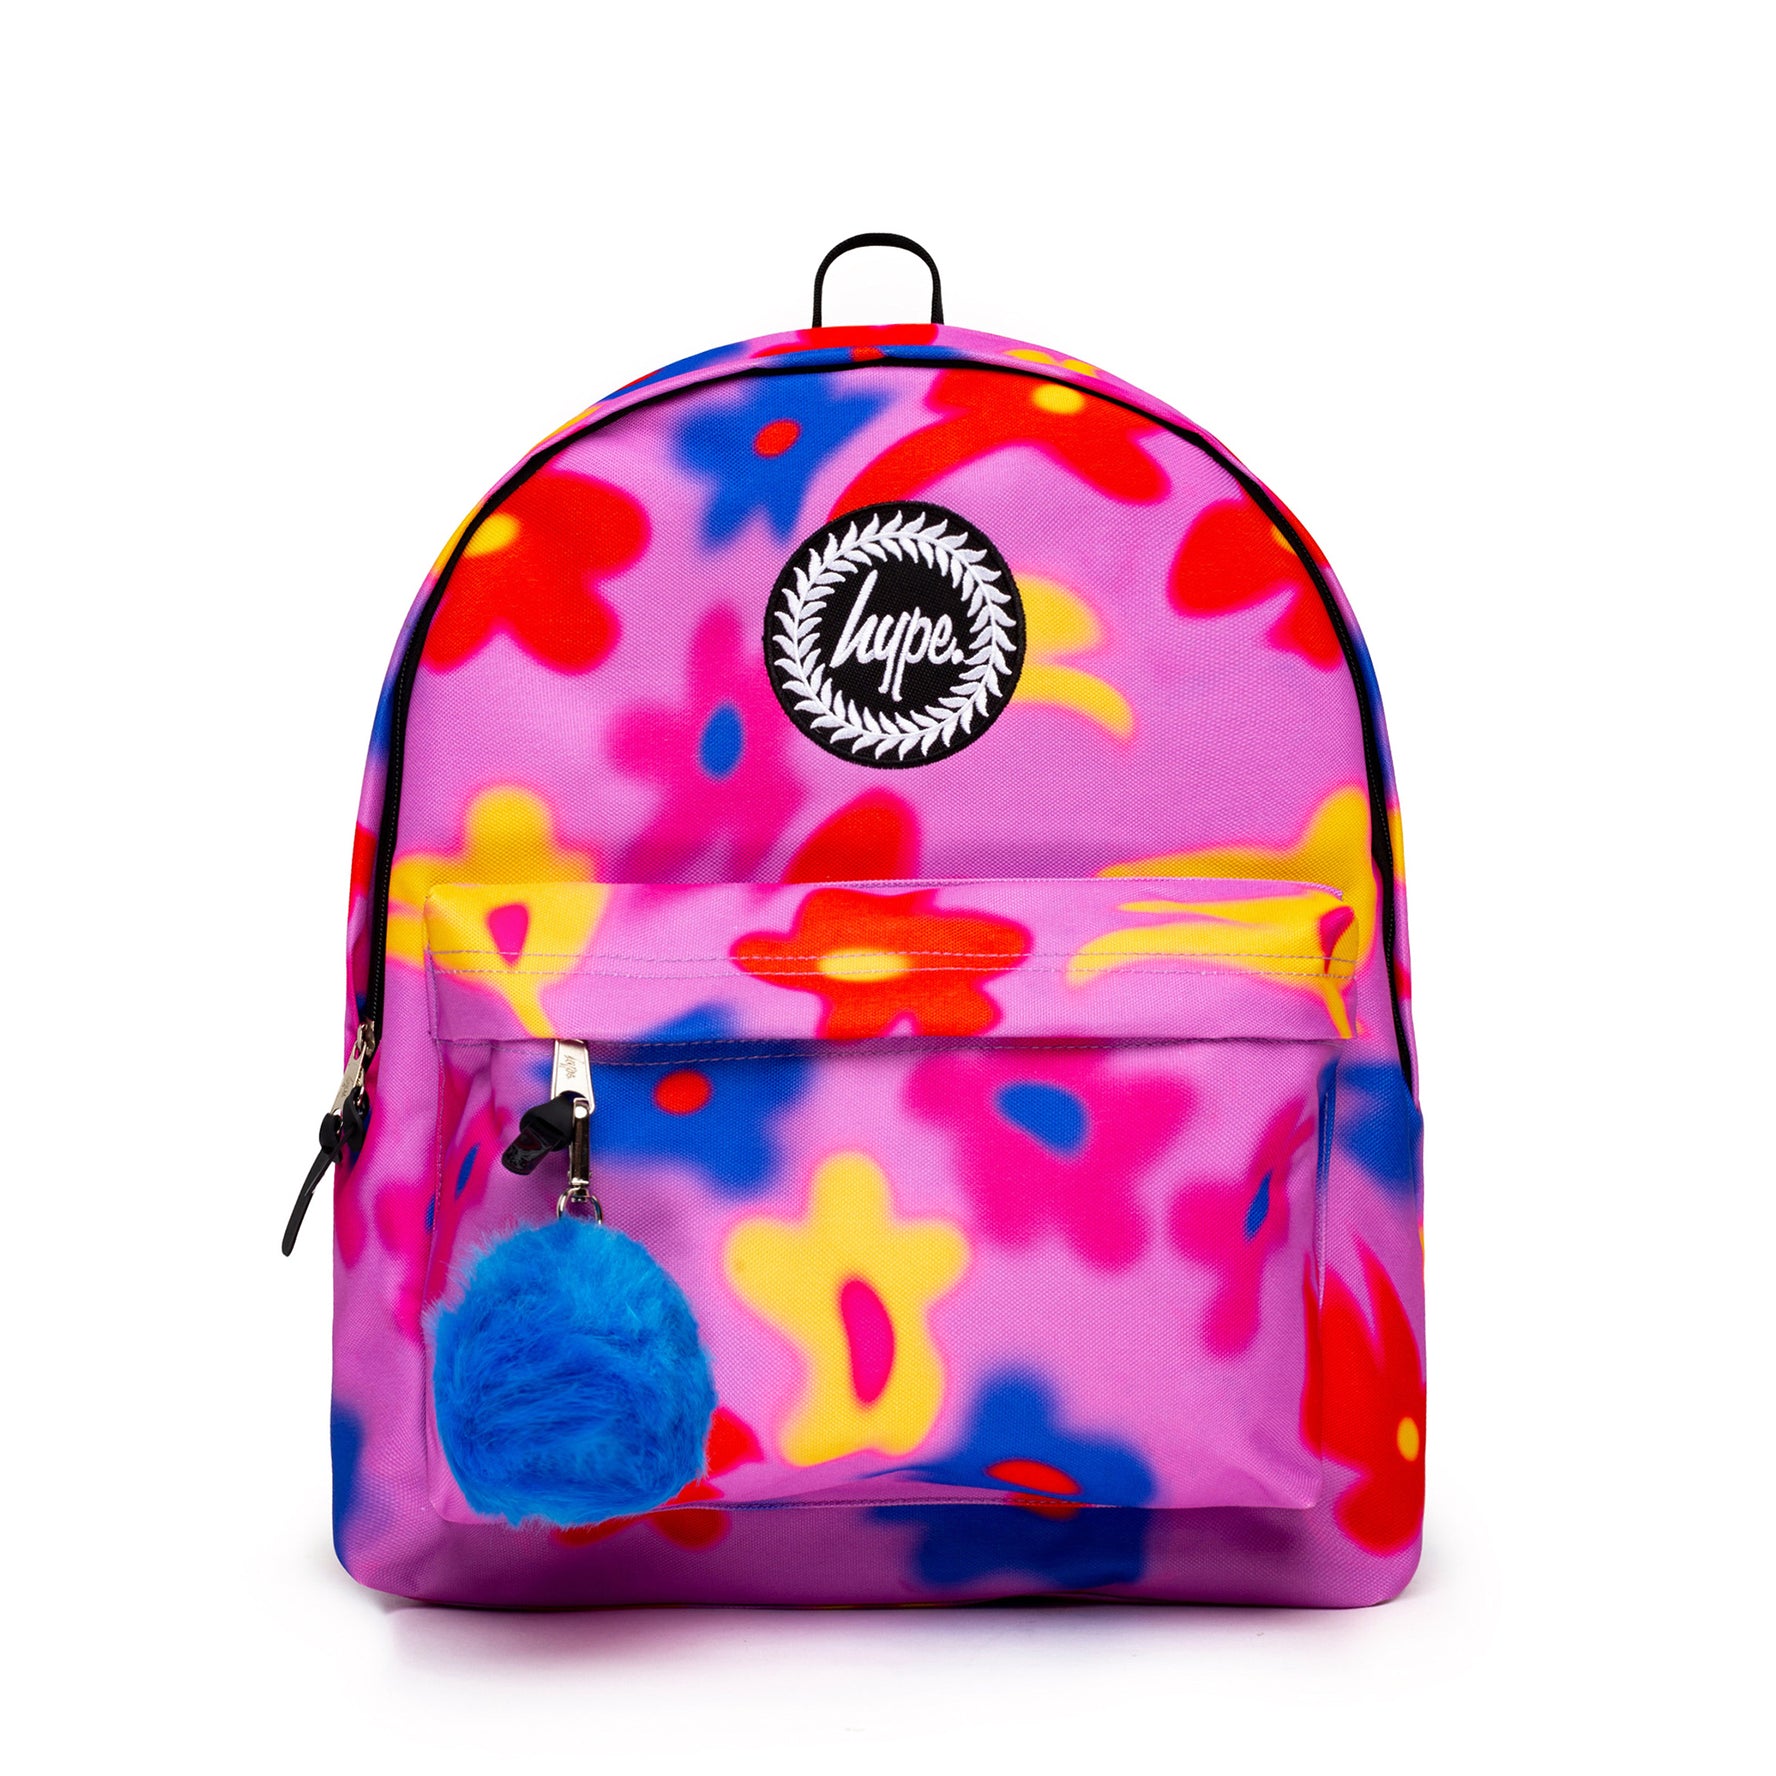 Daisy Blur Backpack-Backpack-Hype-Pink Blur-SchoolBagsAndStuff